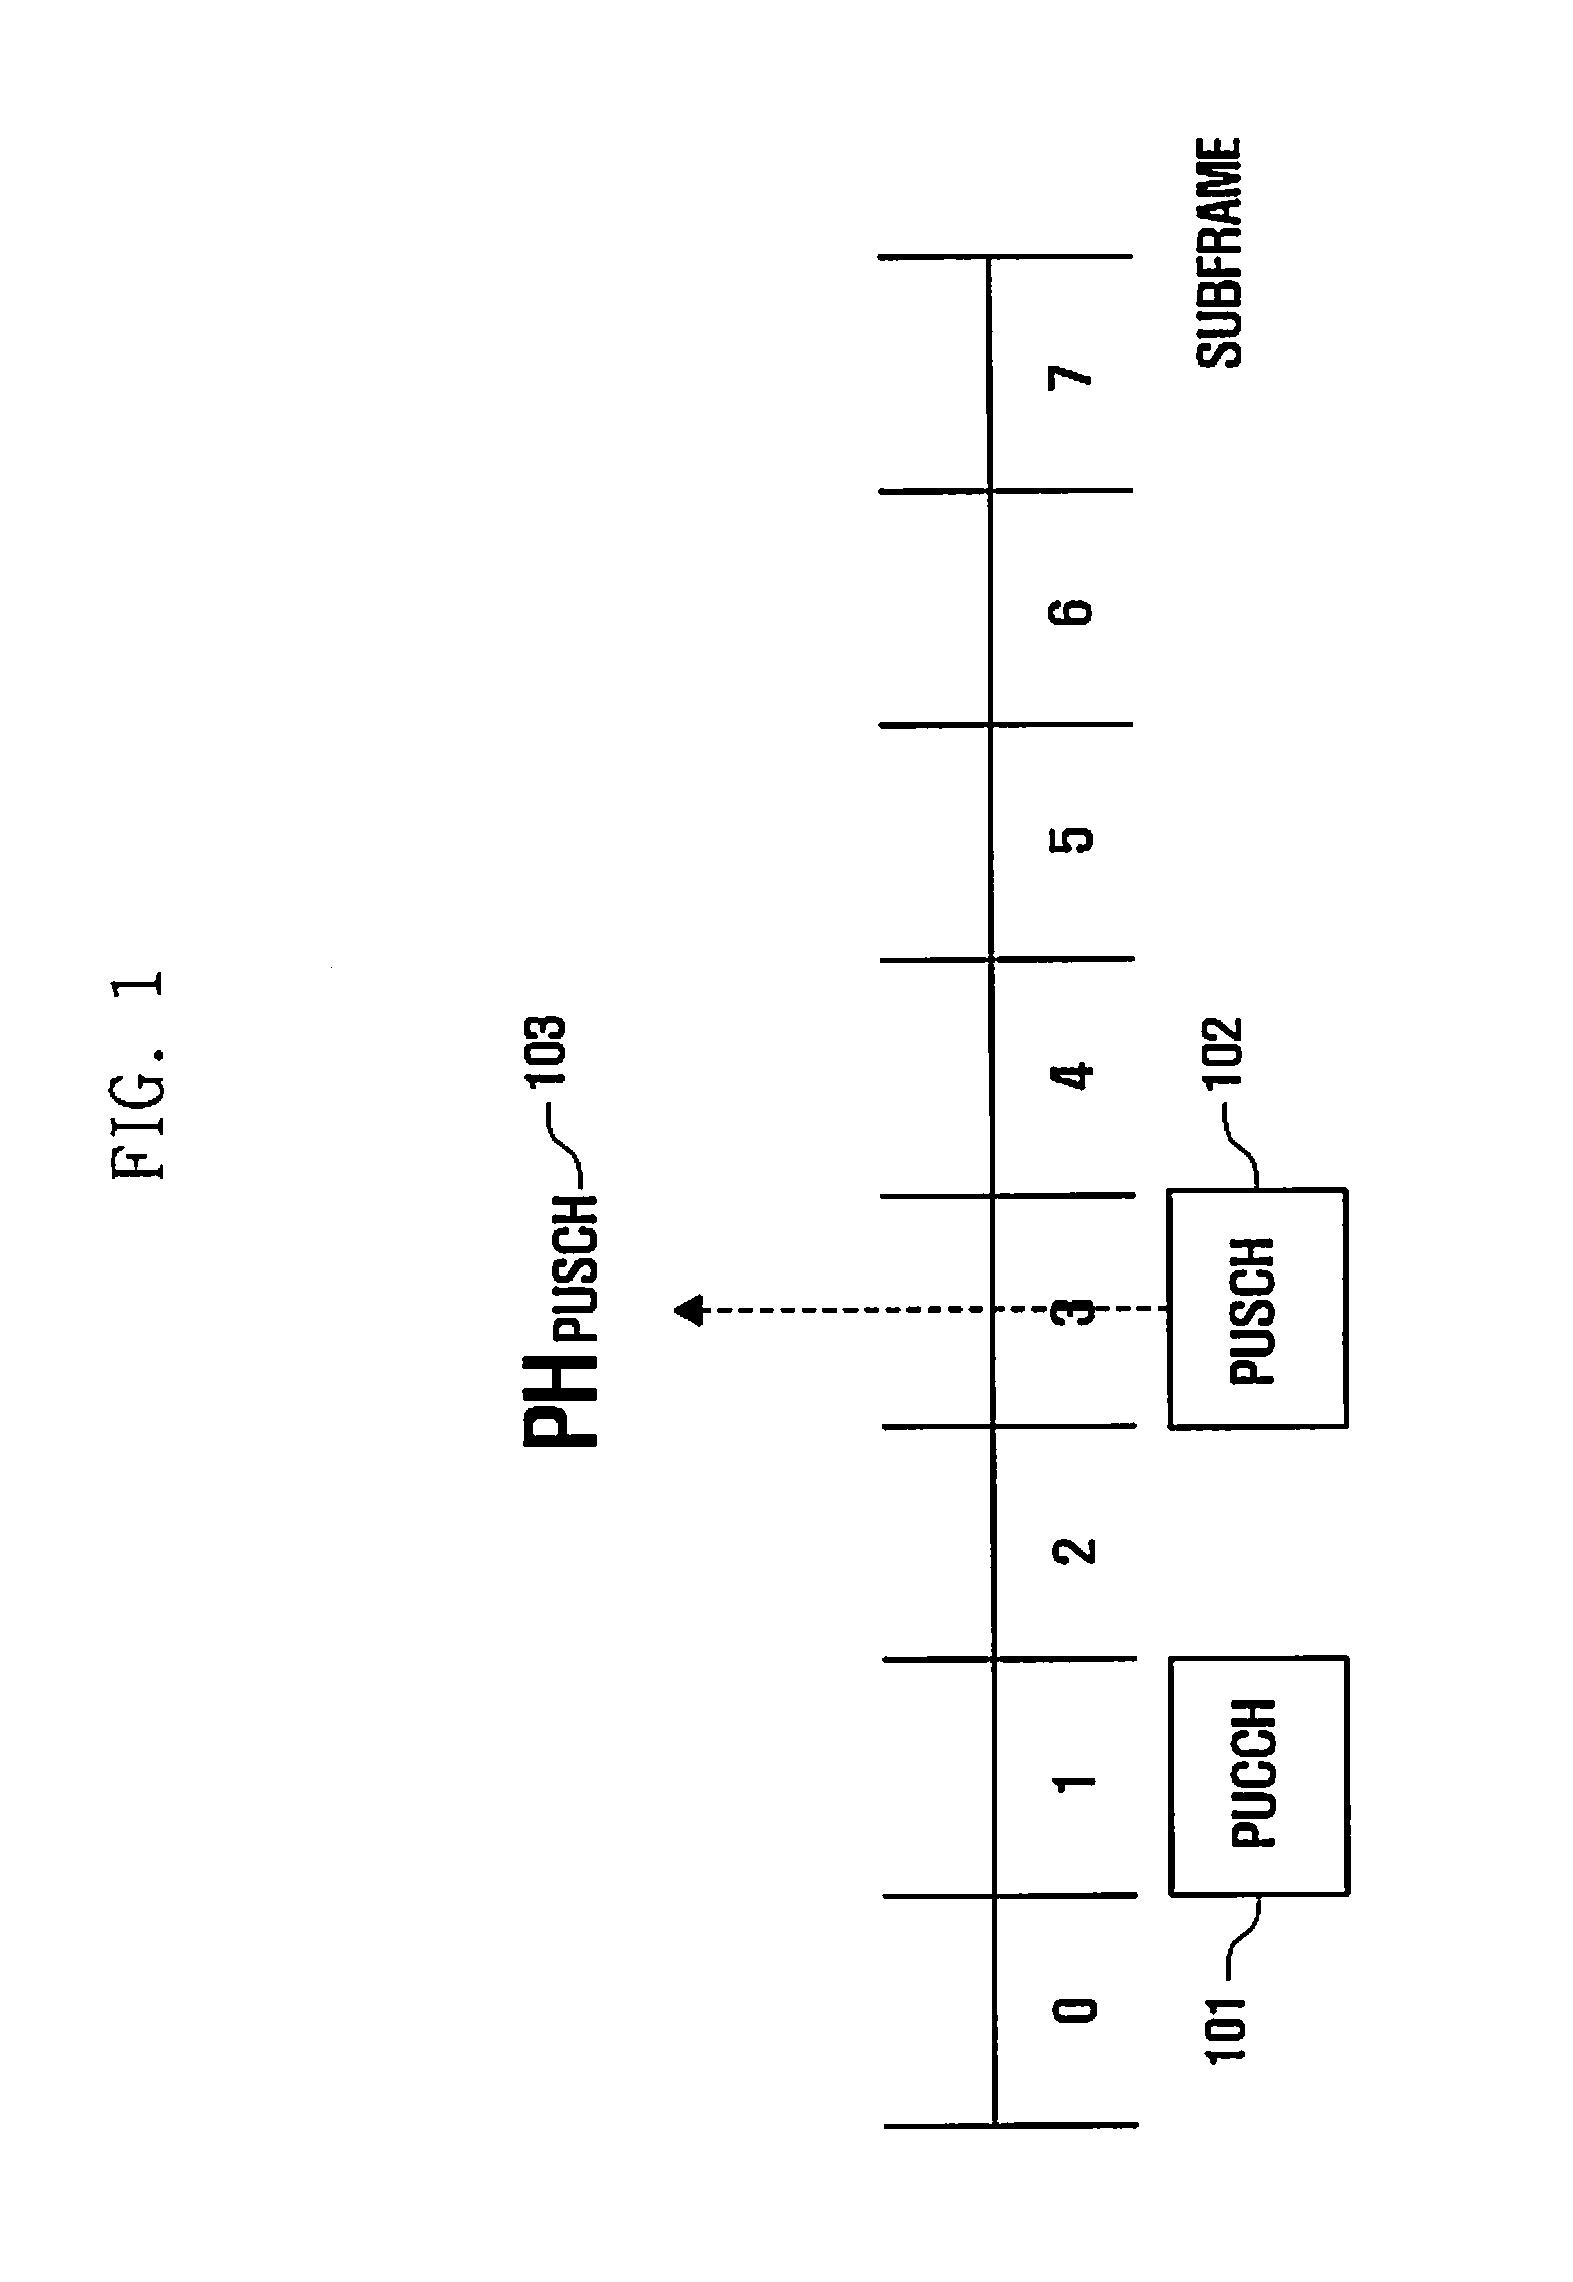 Methods for power headroom reporting, resource allocation, and power control